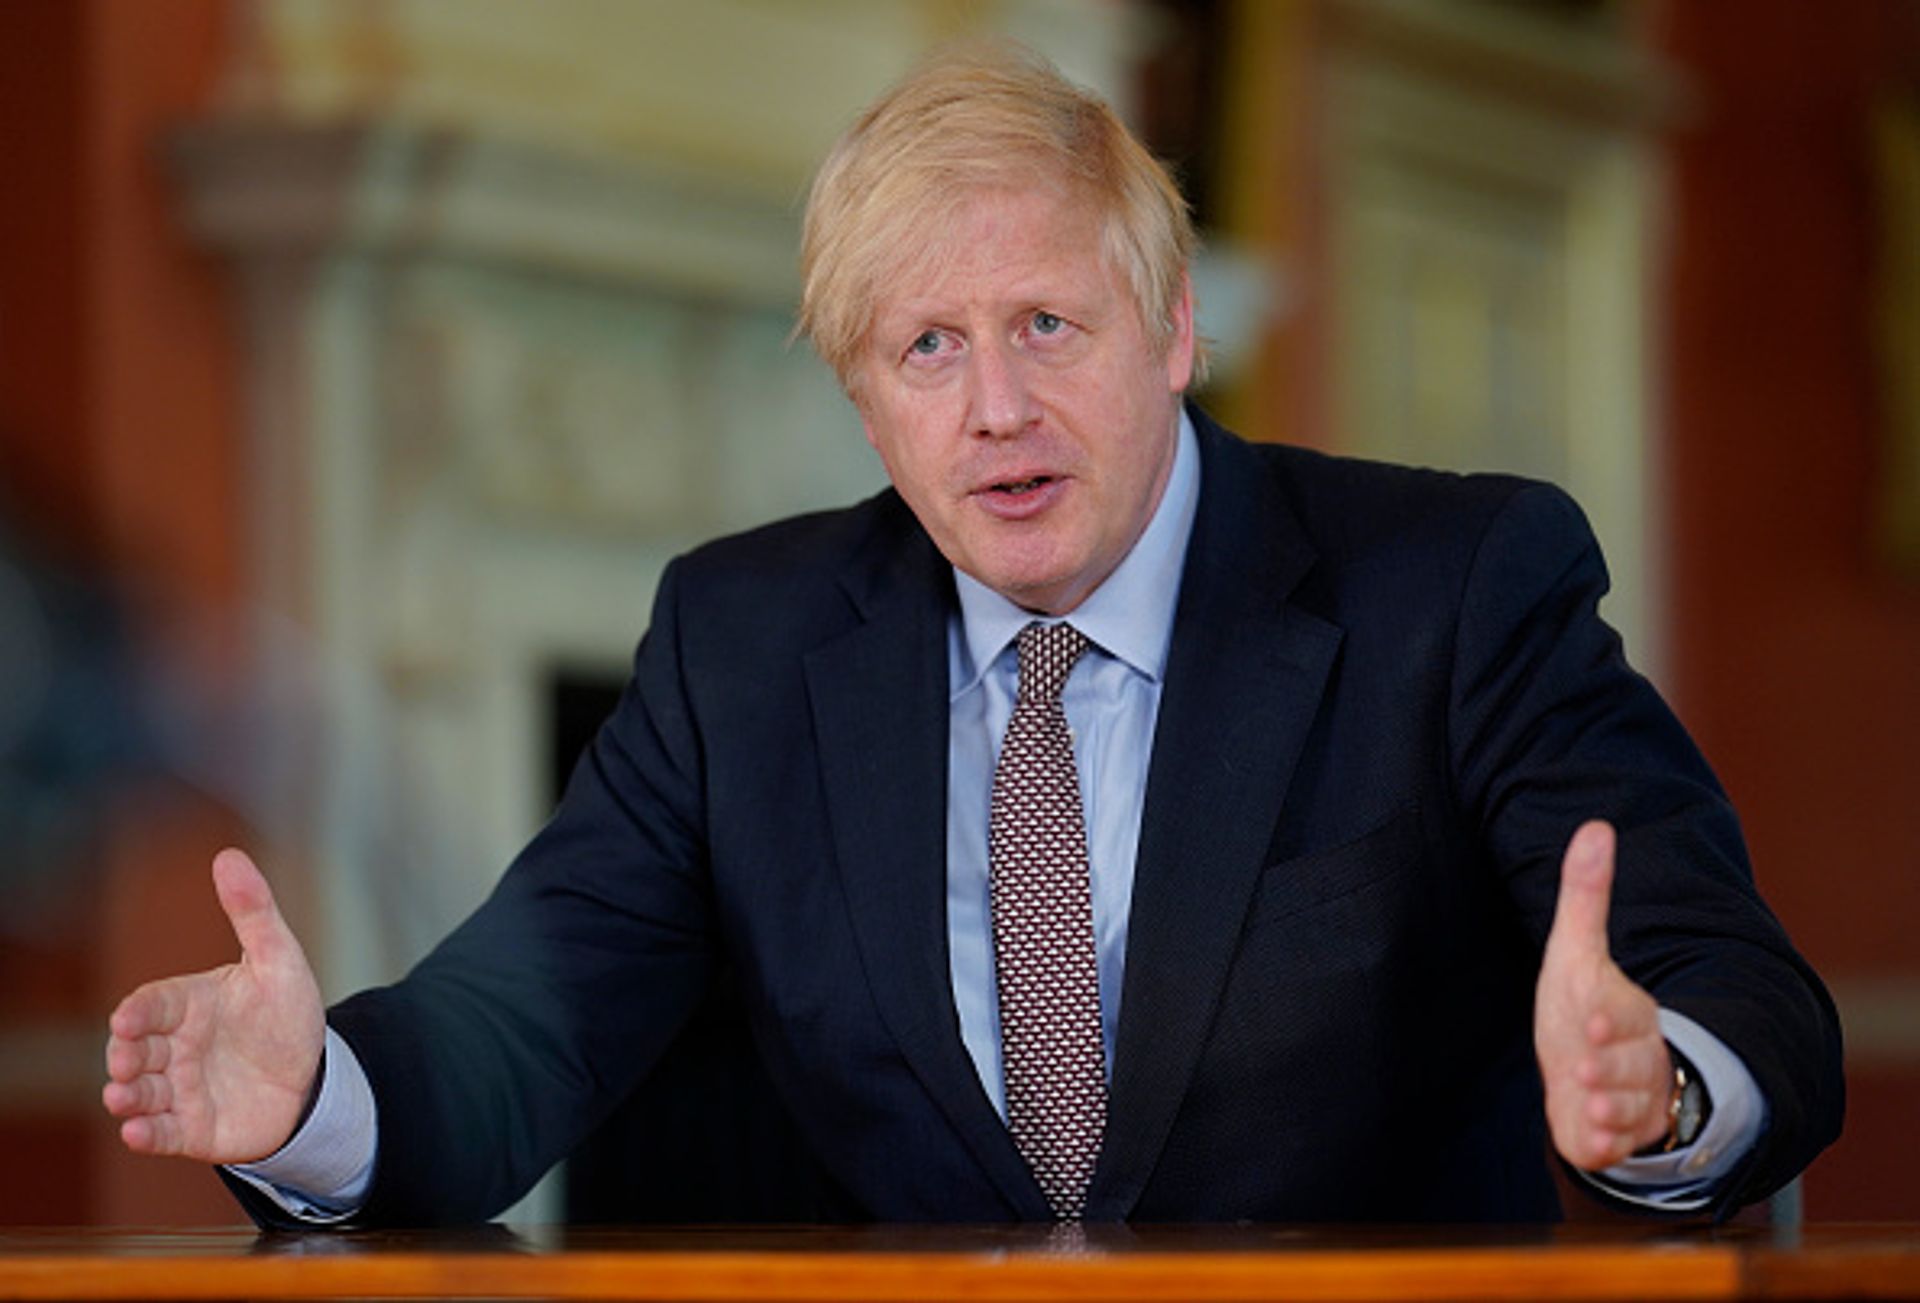 Britain's prime minister Boris Johnson announced the next stage in easing lockdown measures intended to curb the spread of Covid-19 Photo: © Getty Images